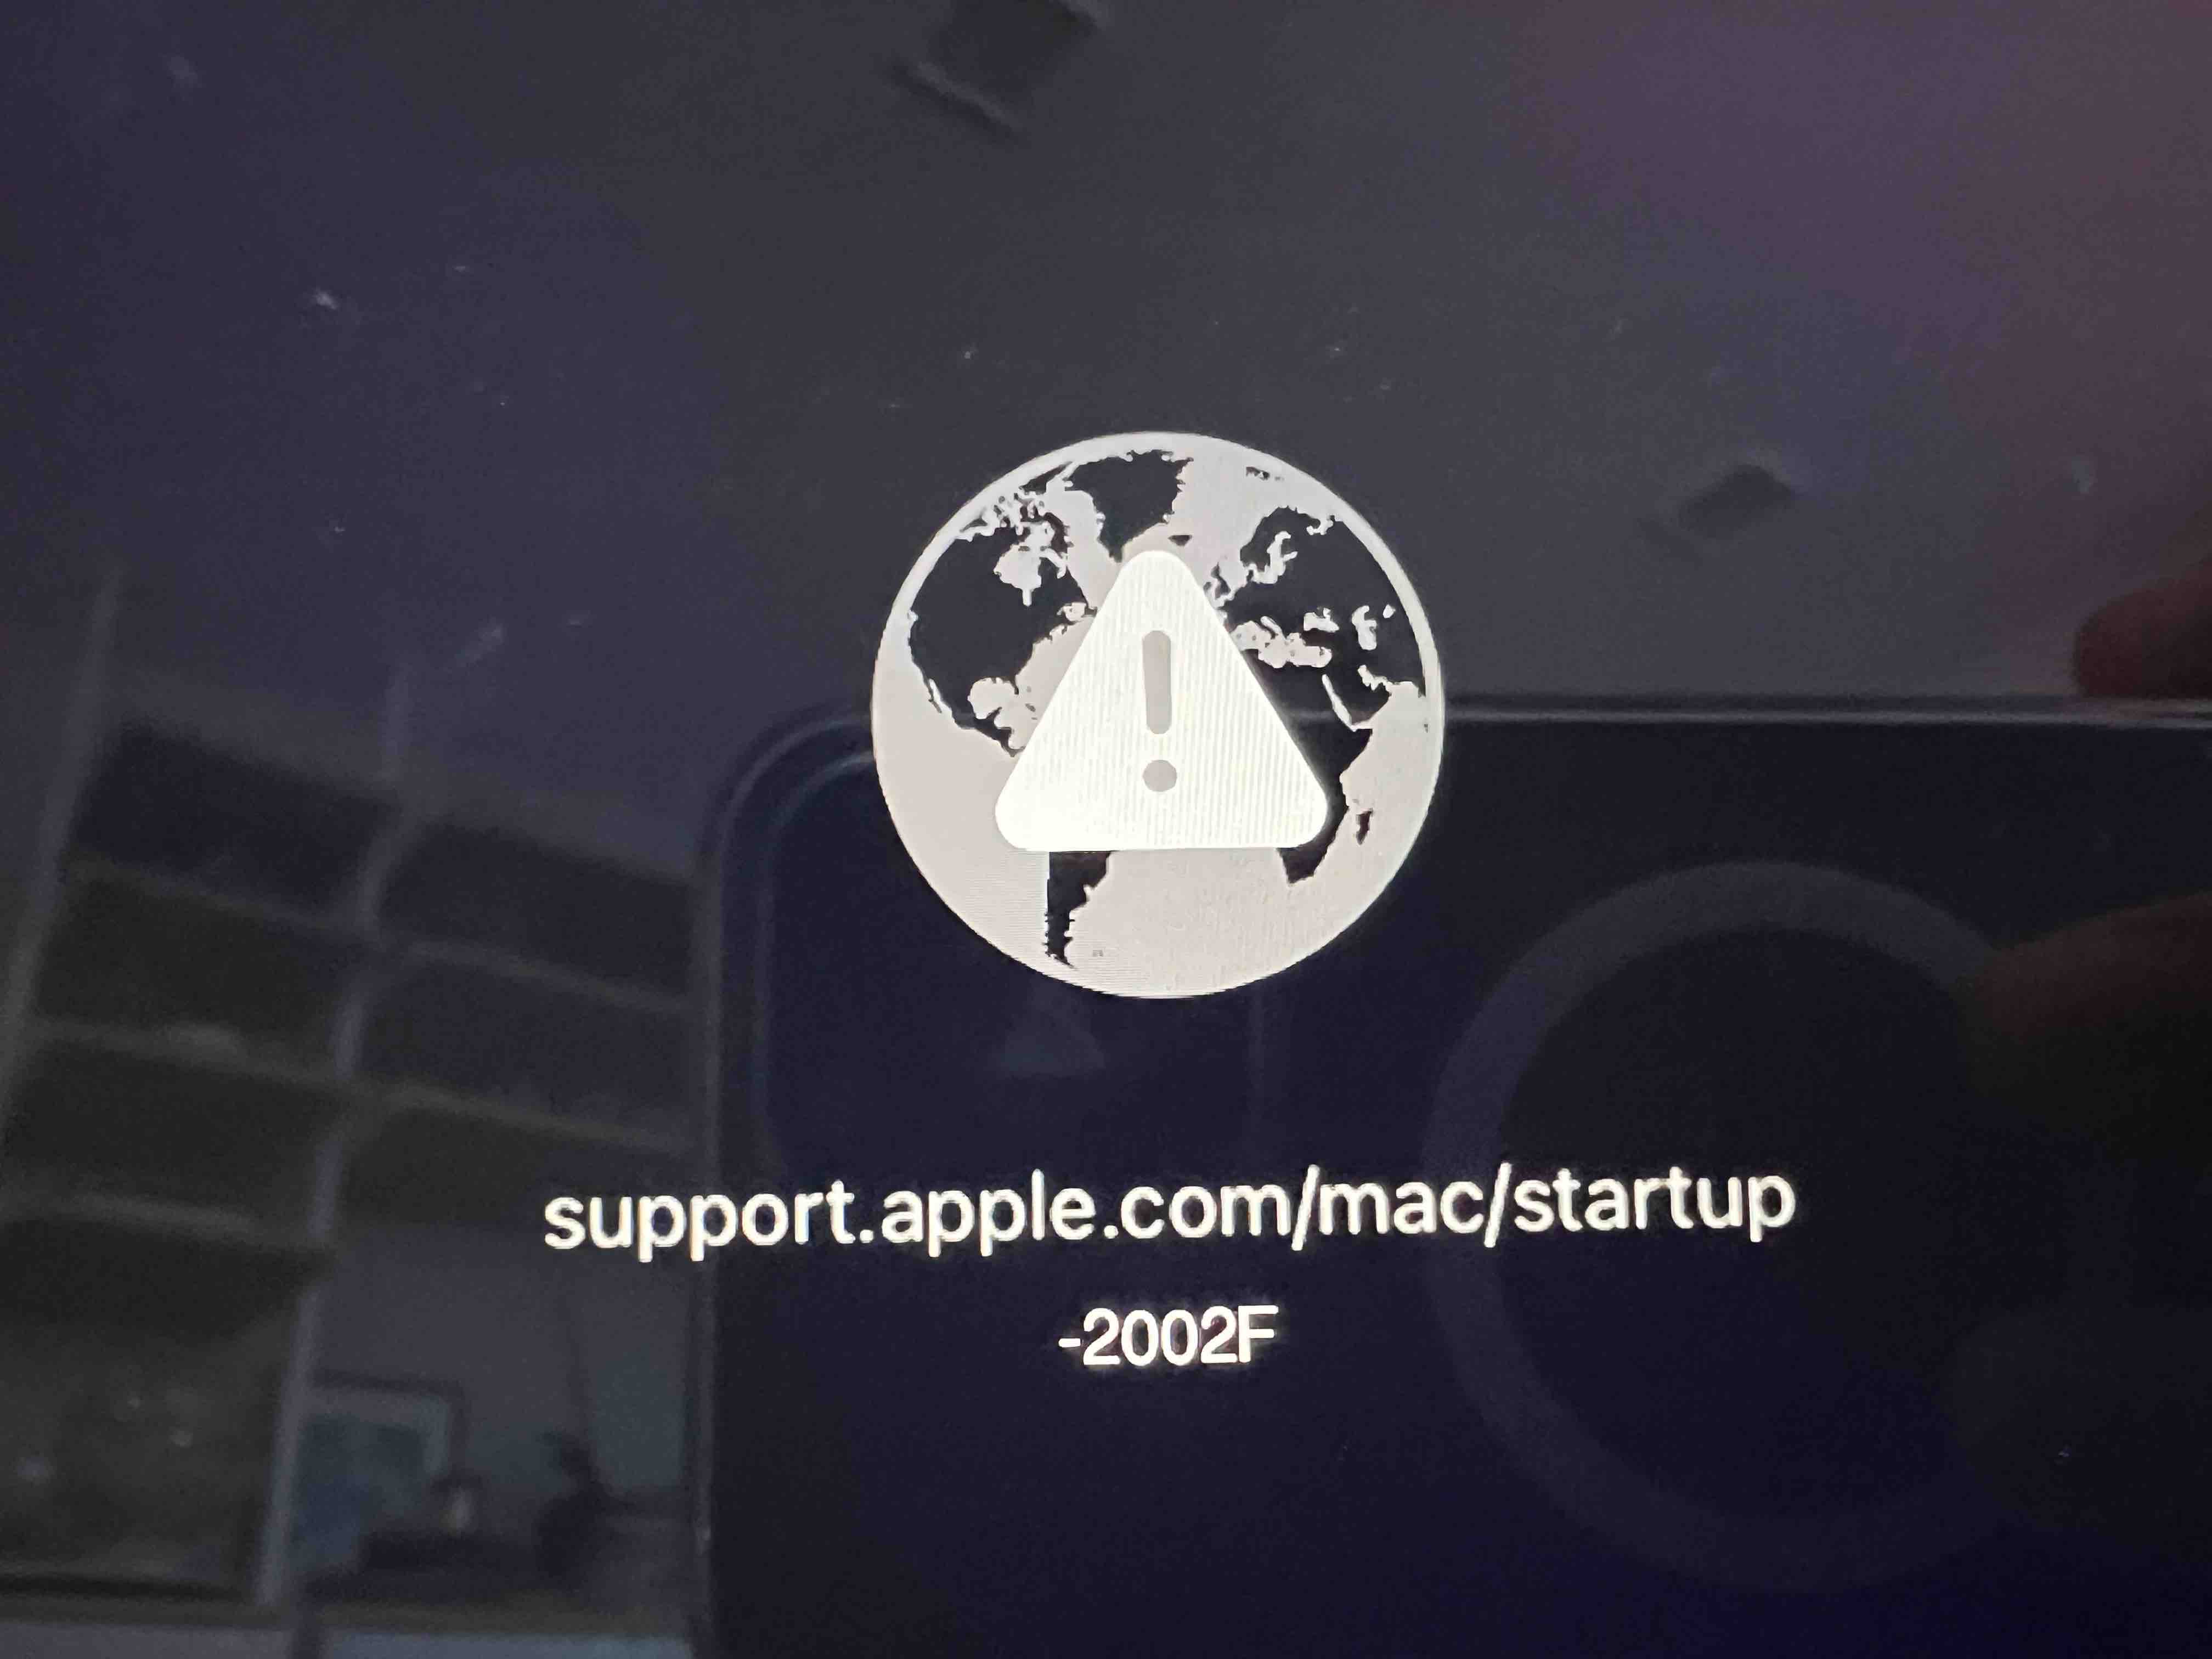 Apple ended support for my Mac. Now what?